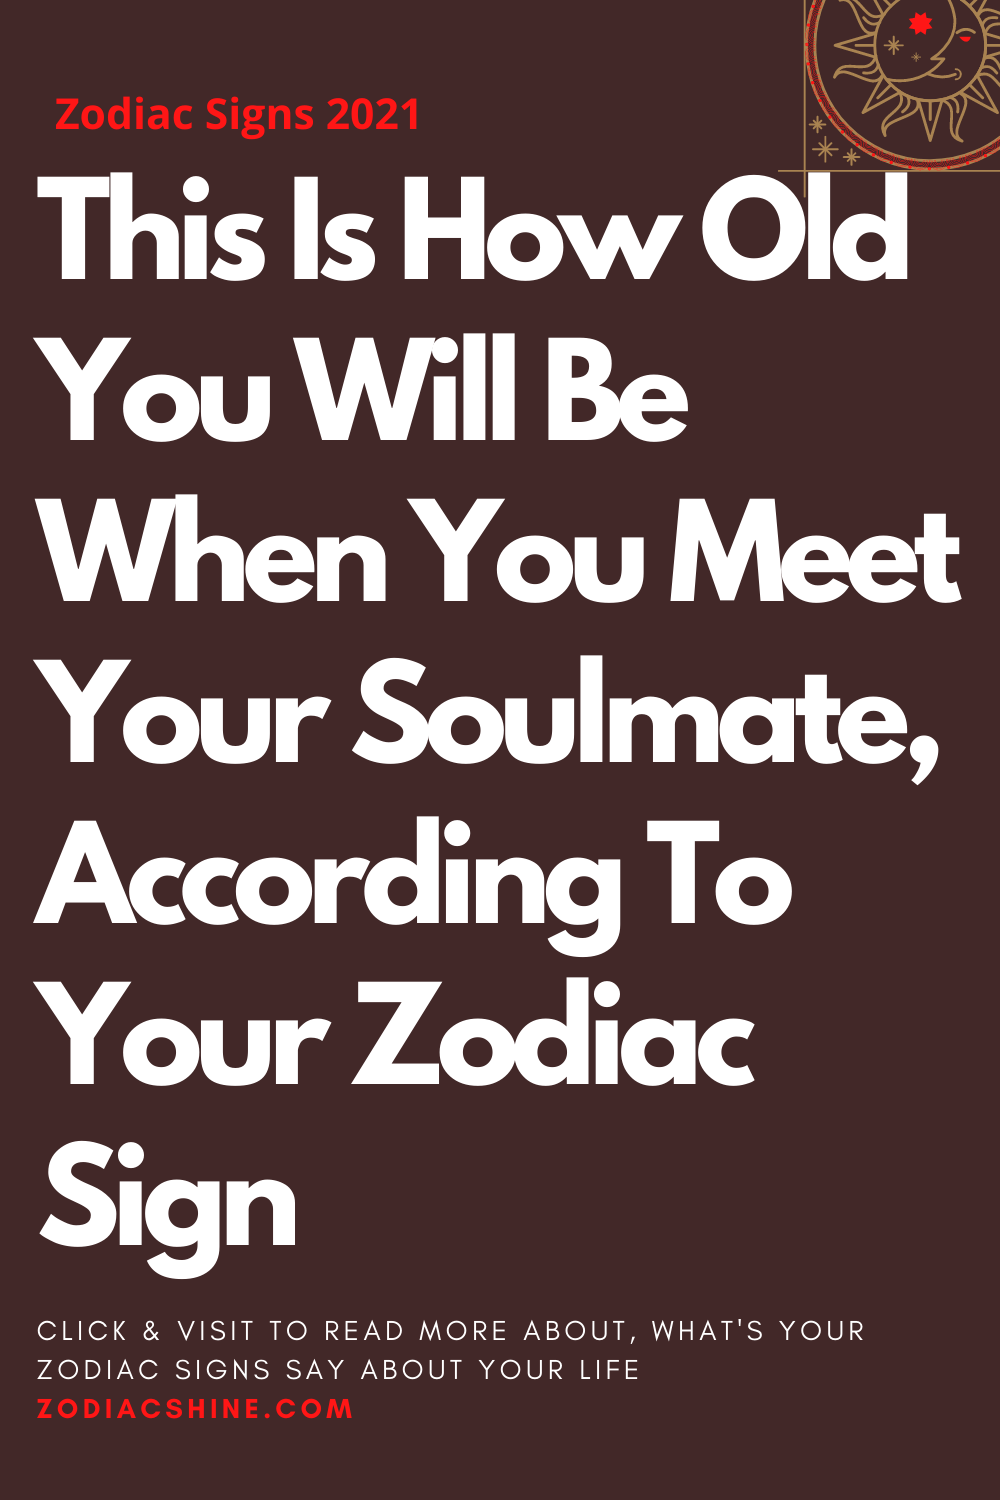 This Is How Old You Will Be When You Meet Your Soulmate According To Your Zodiac Sign